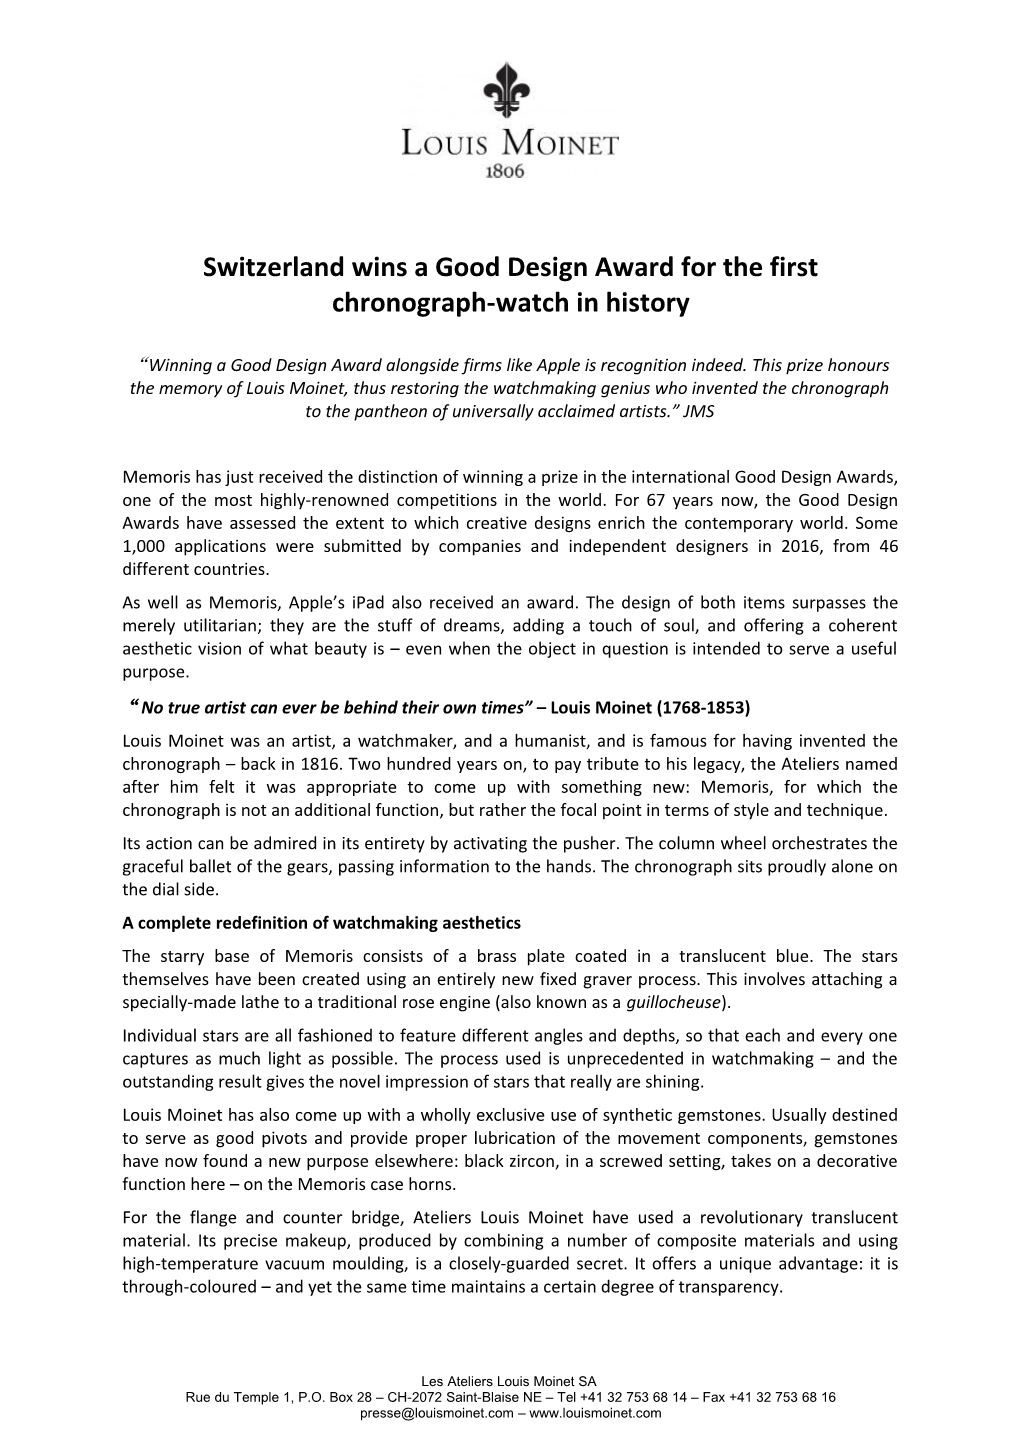 Switzerland Wins a Good Design Award for the First Chronograph-Watch in History